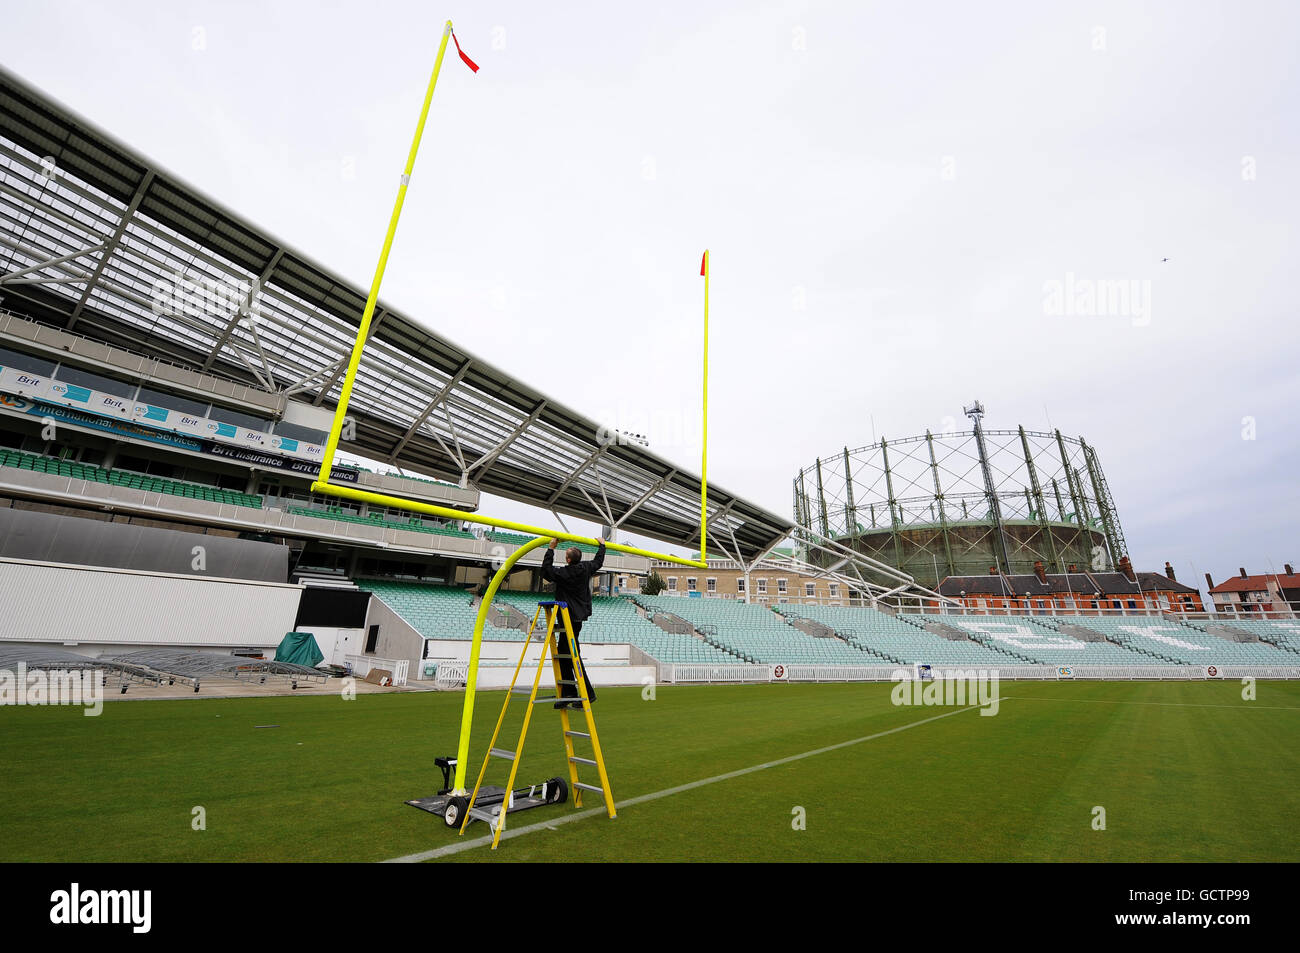 A groundsman prepares an American Football goal on the pitch at the Brit Insurance Oval Stock Photo